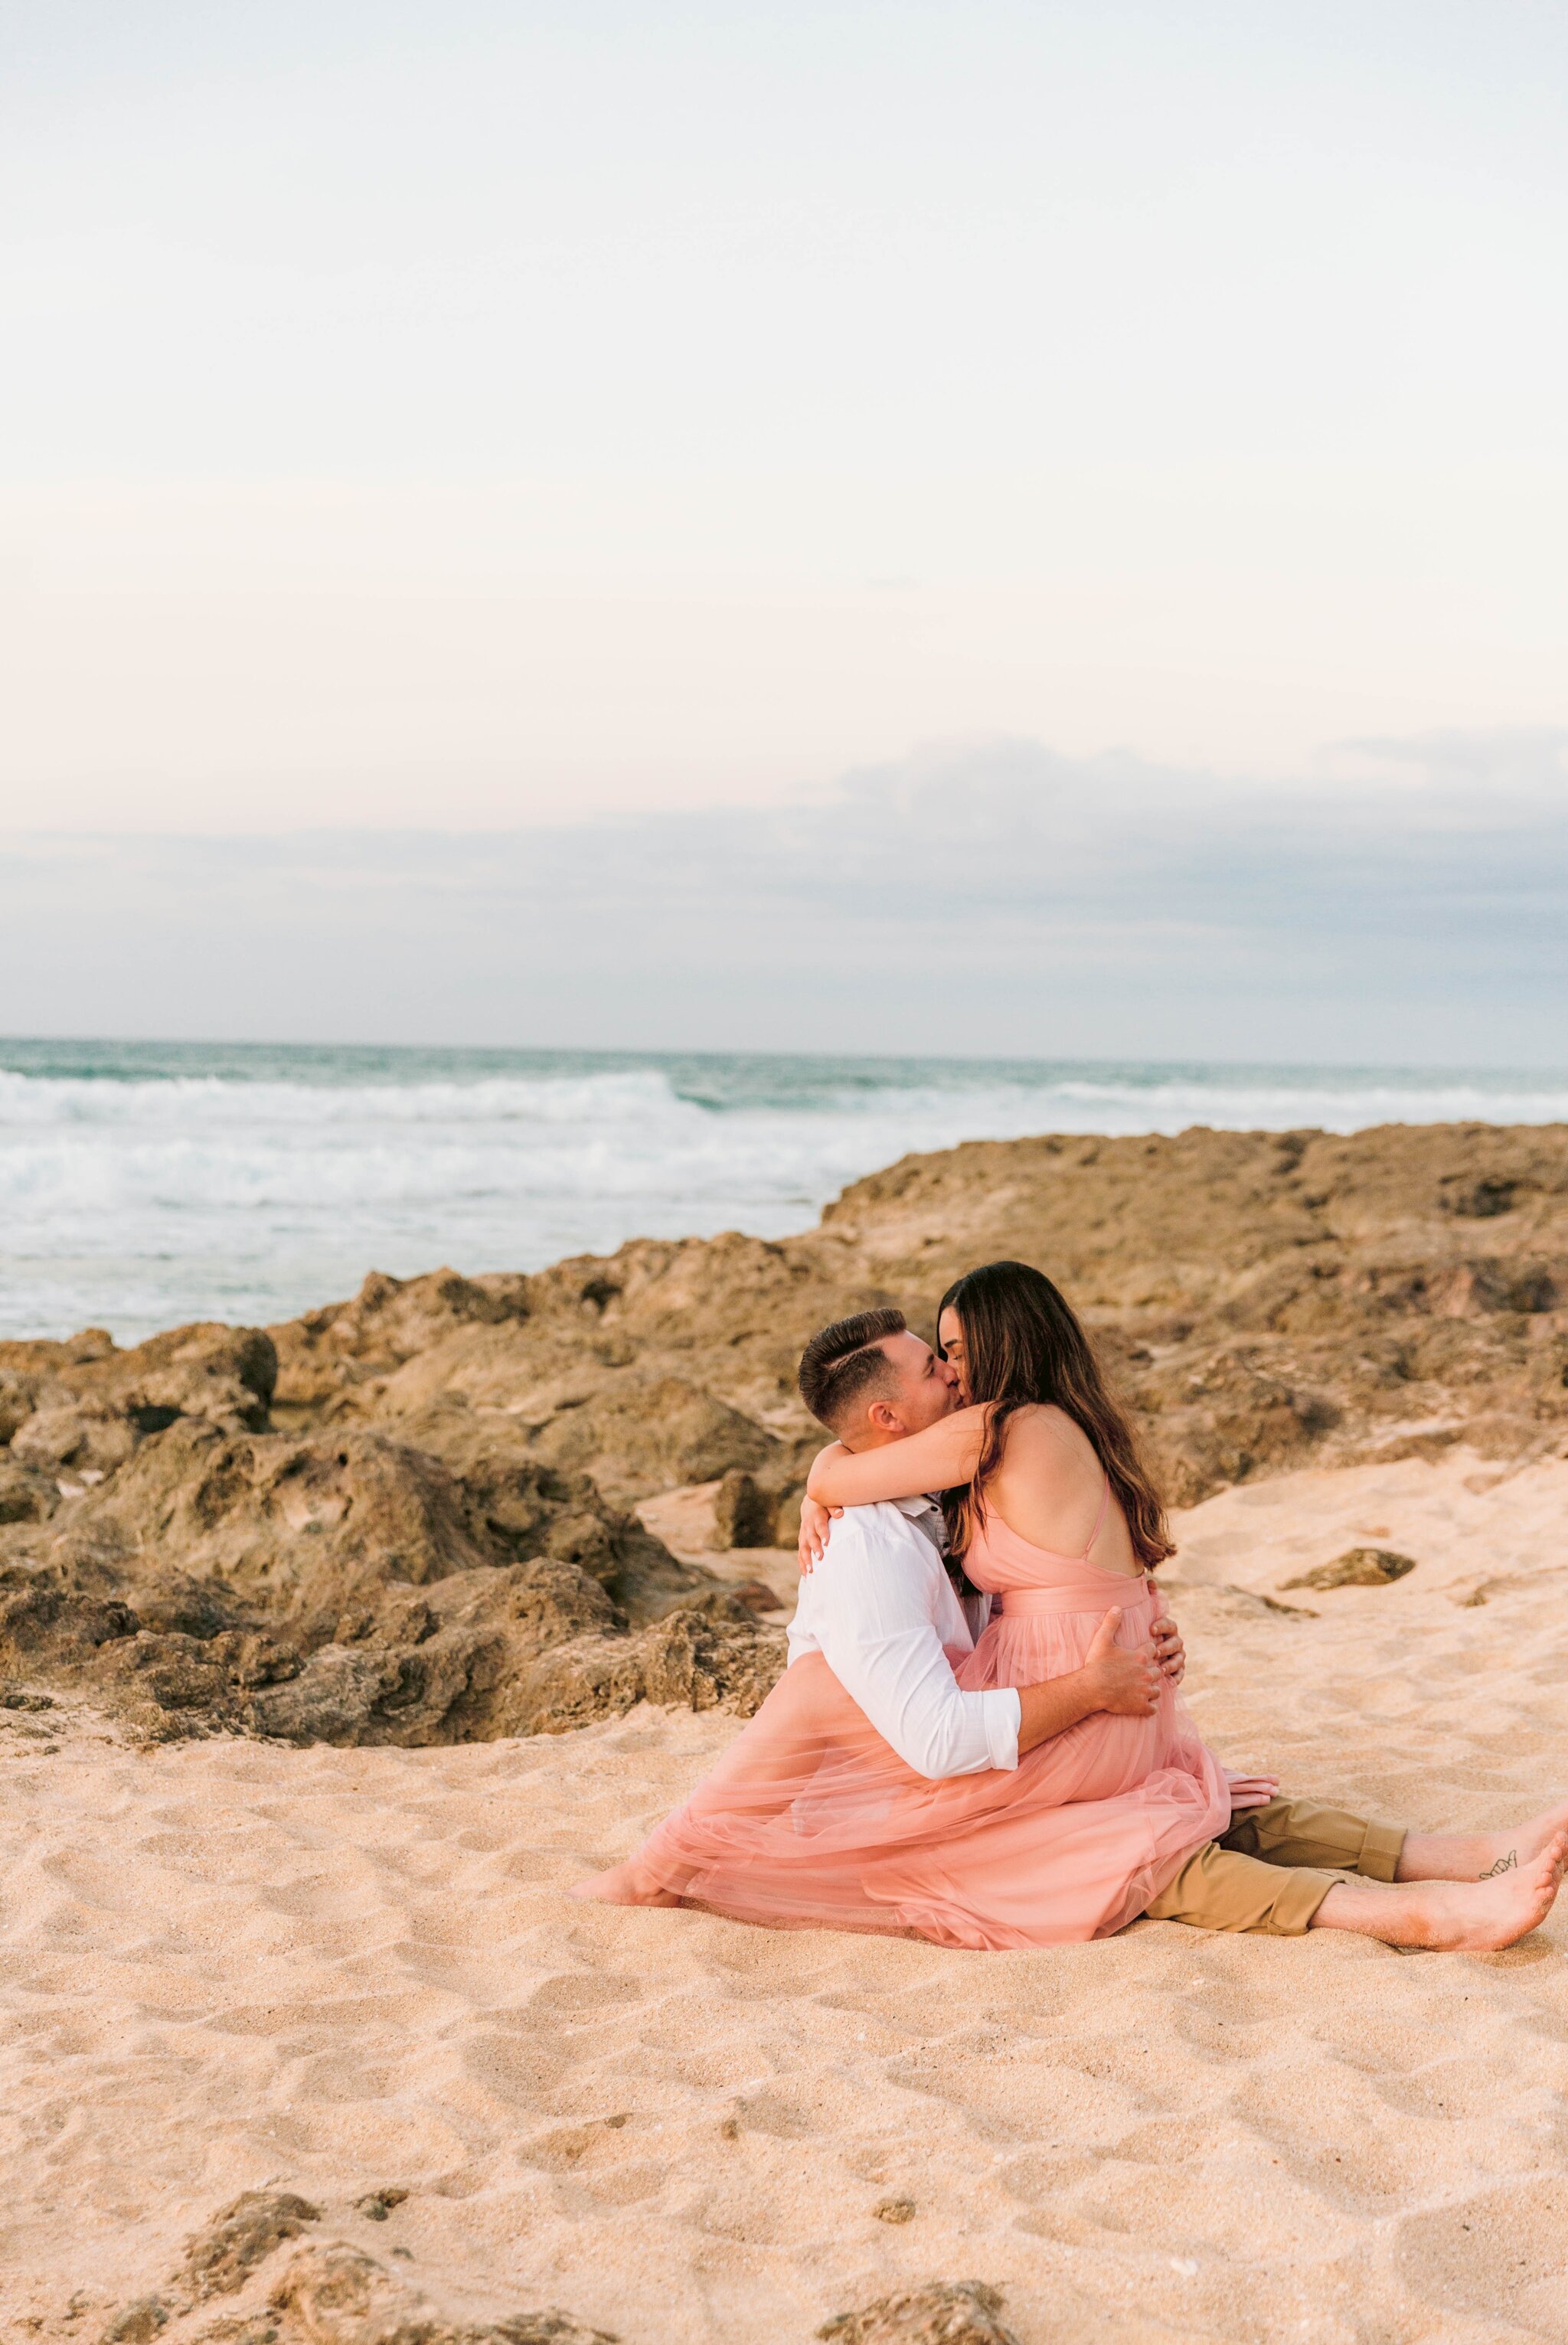 Romantic Beach Engagement Photography Session at Kaena Point - Oahu Hawaii Photographer